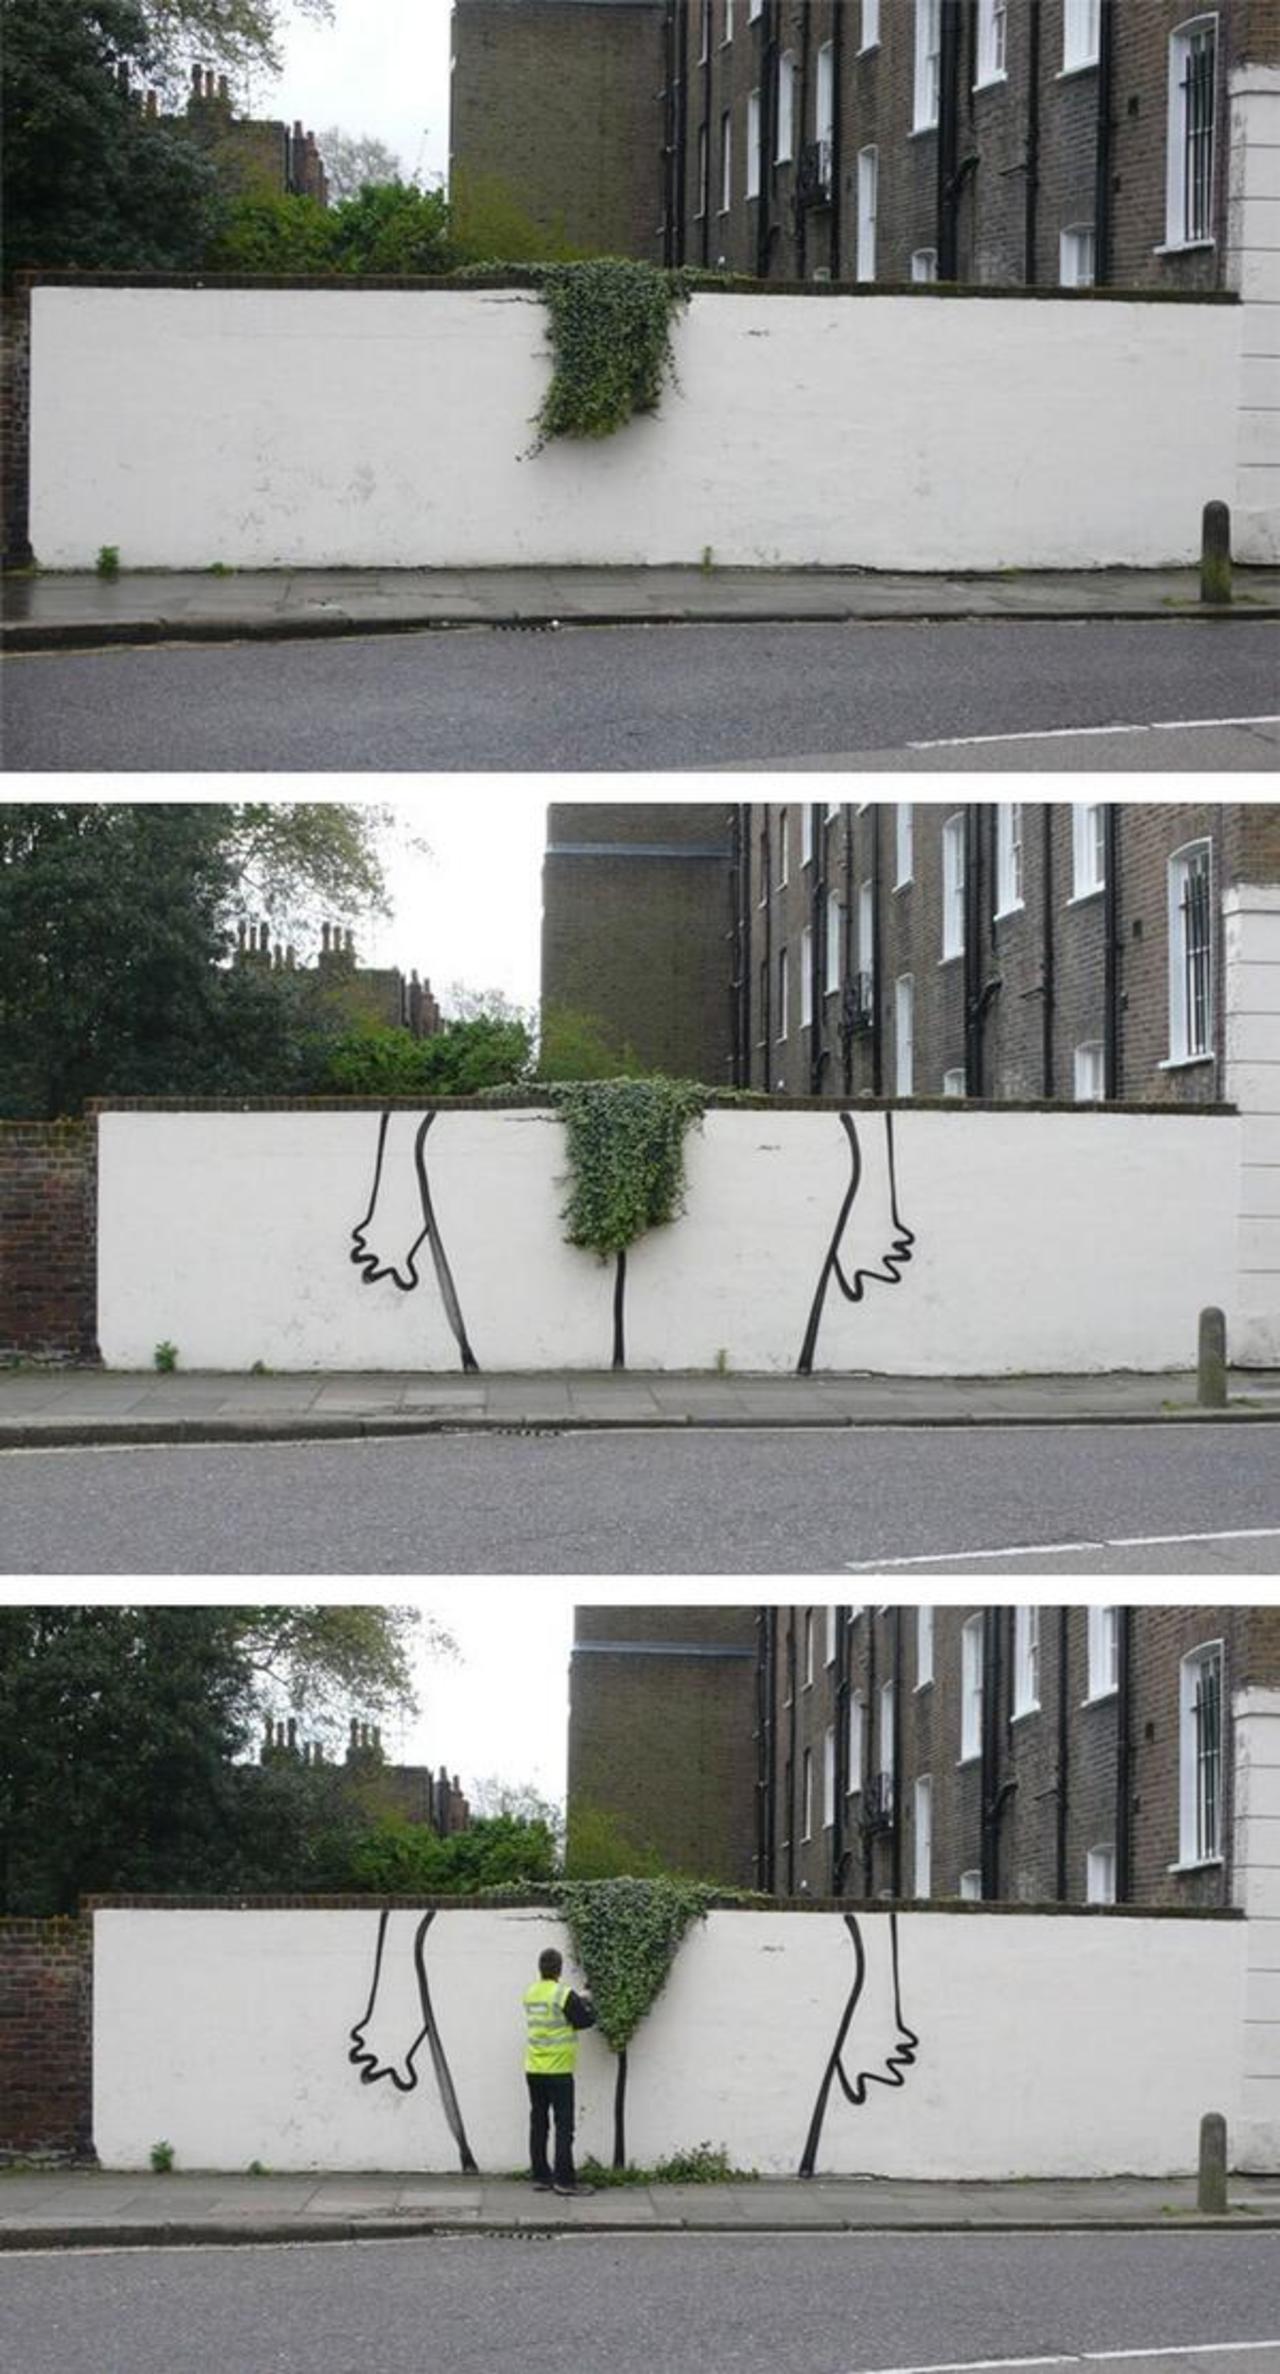 #StreetArtSaturday #Banksy natural #Streetart showing the trimming of the vines. https://t.co/zUV6D48Zkm